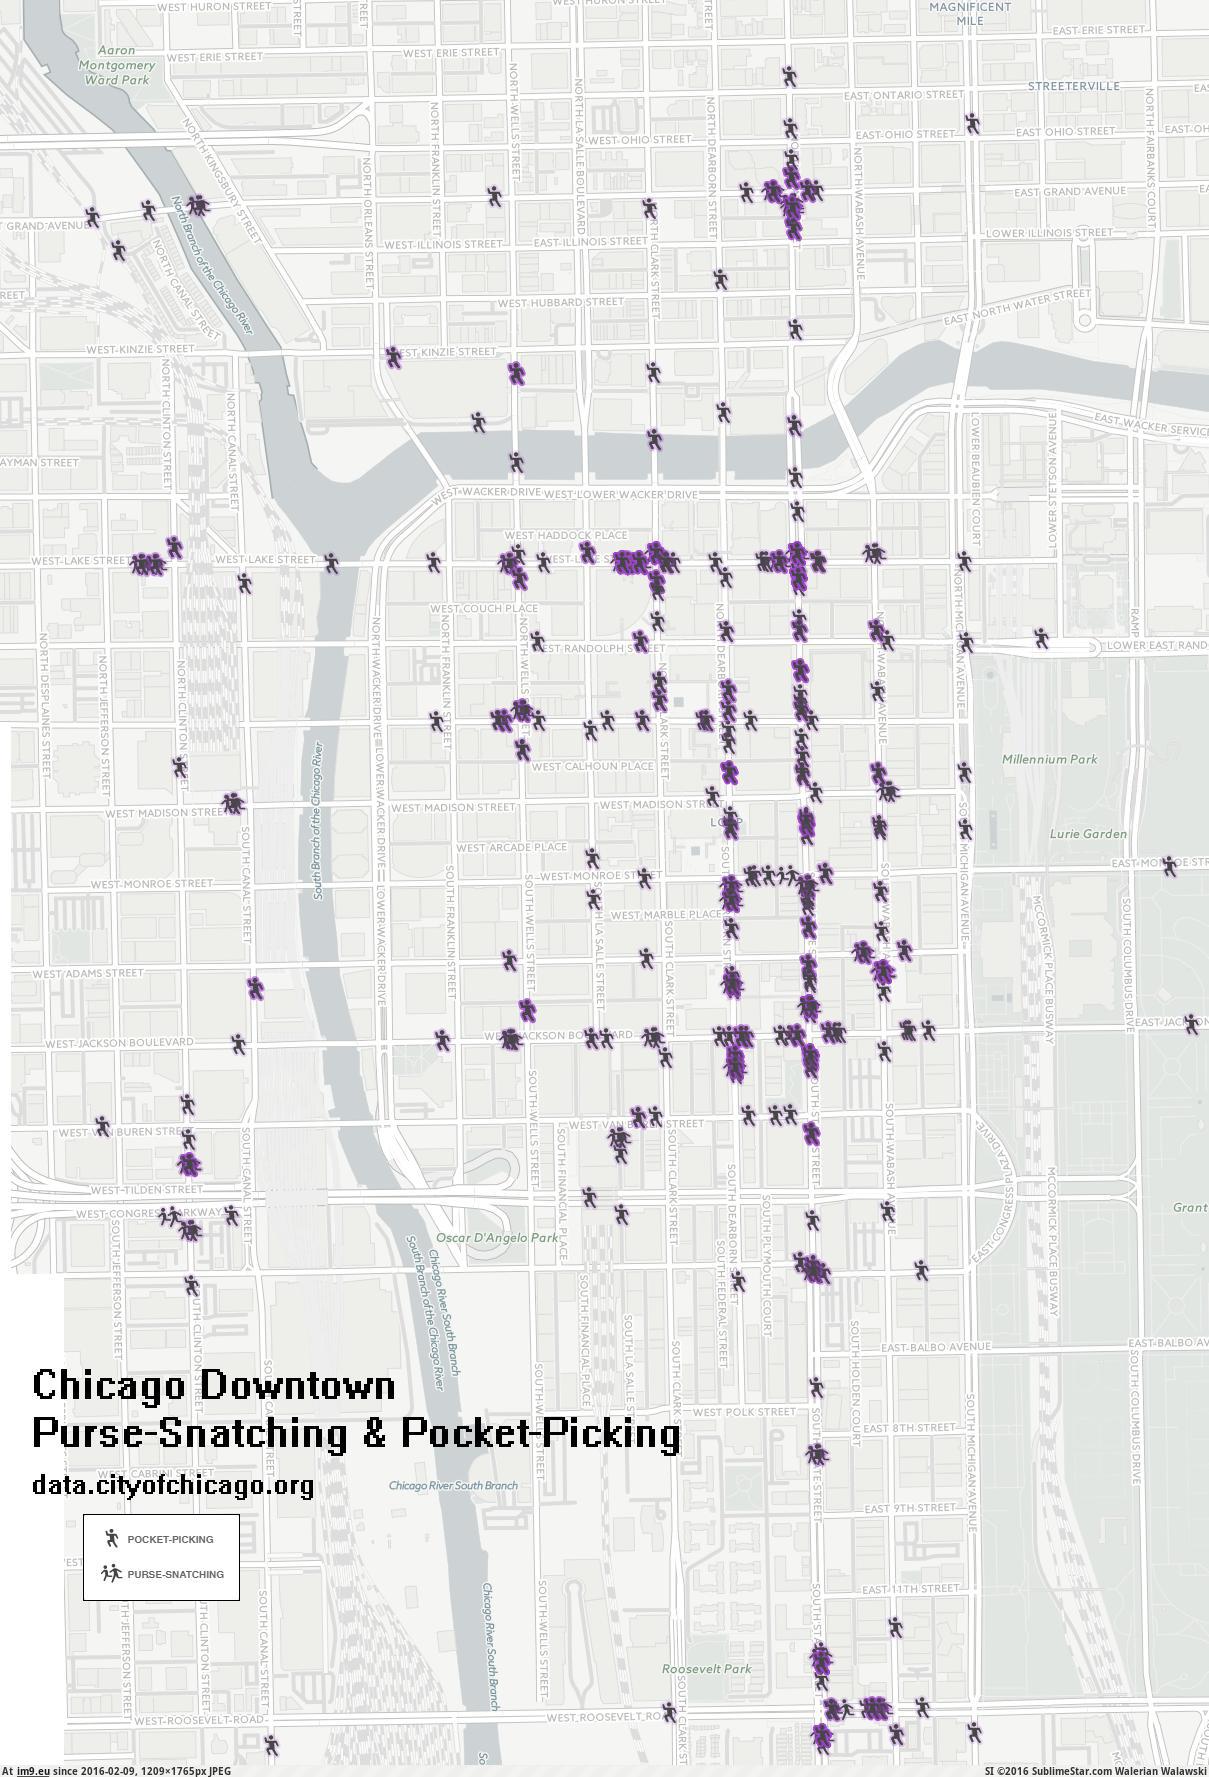 [Mapporn] Chicago Downtown Purse-Snatching & Pocket-Picking [1209x1765] (in My r/MAPS favs)